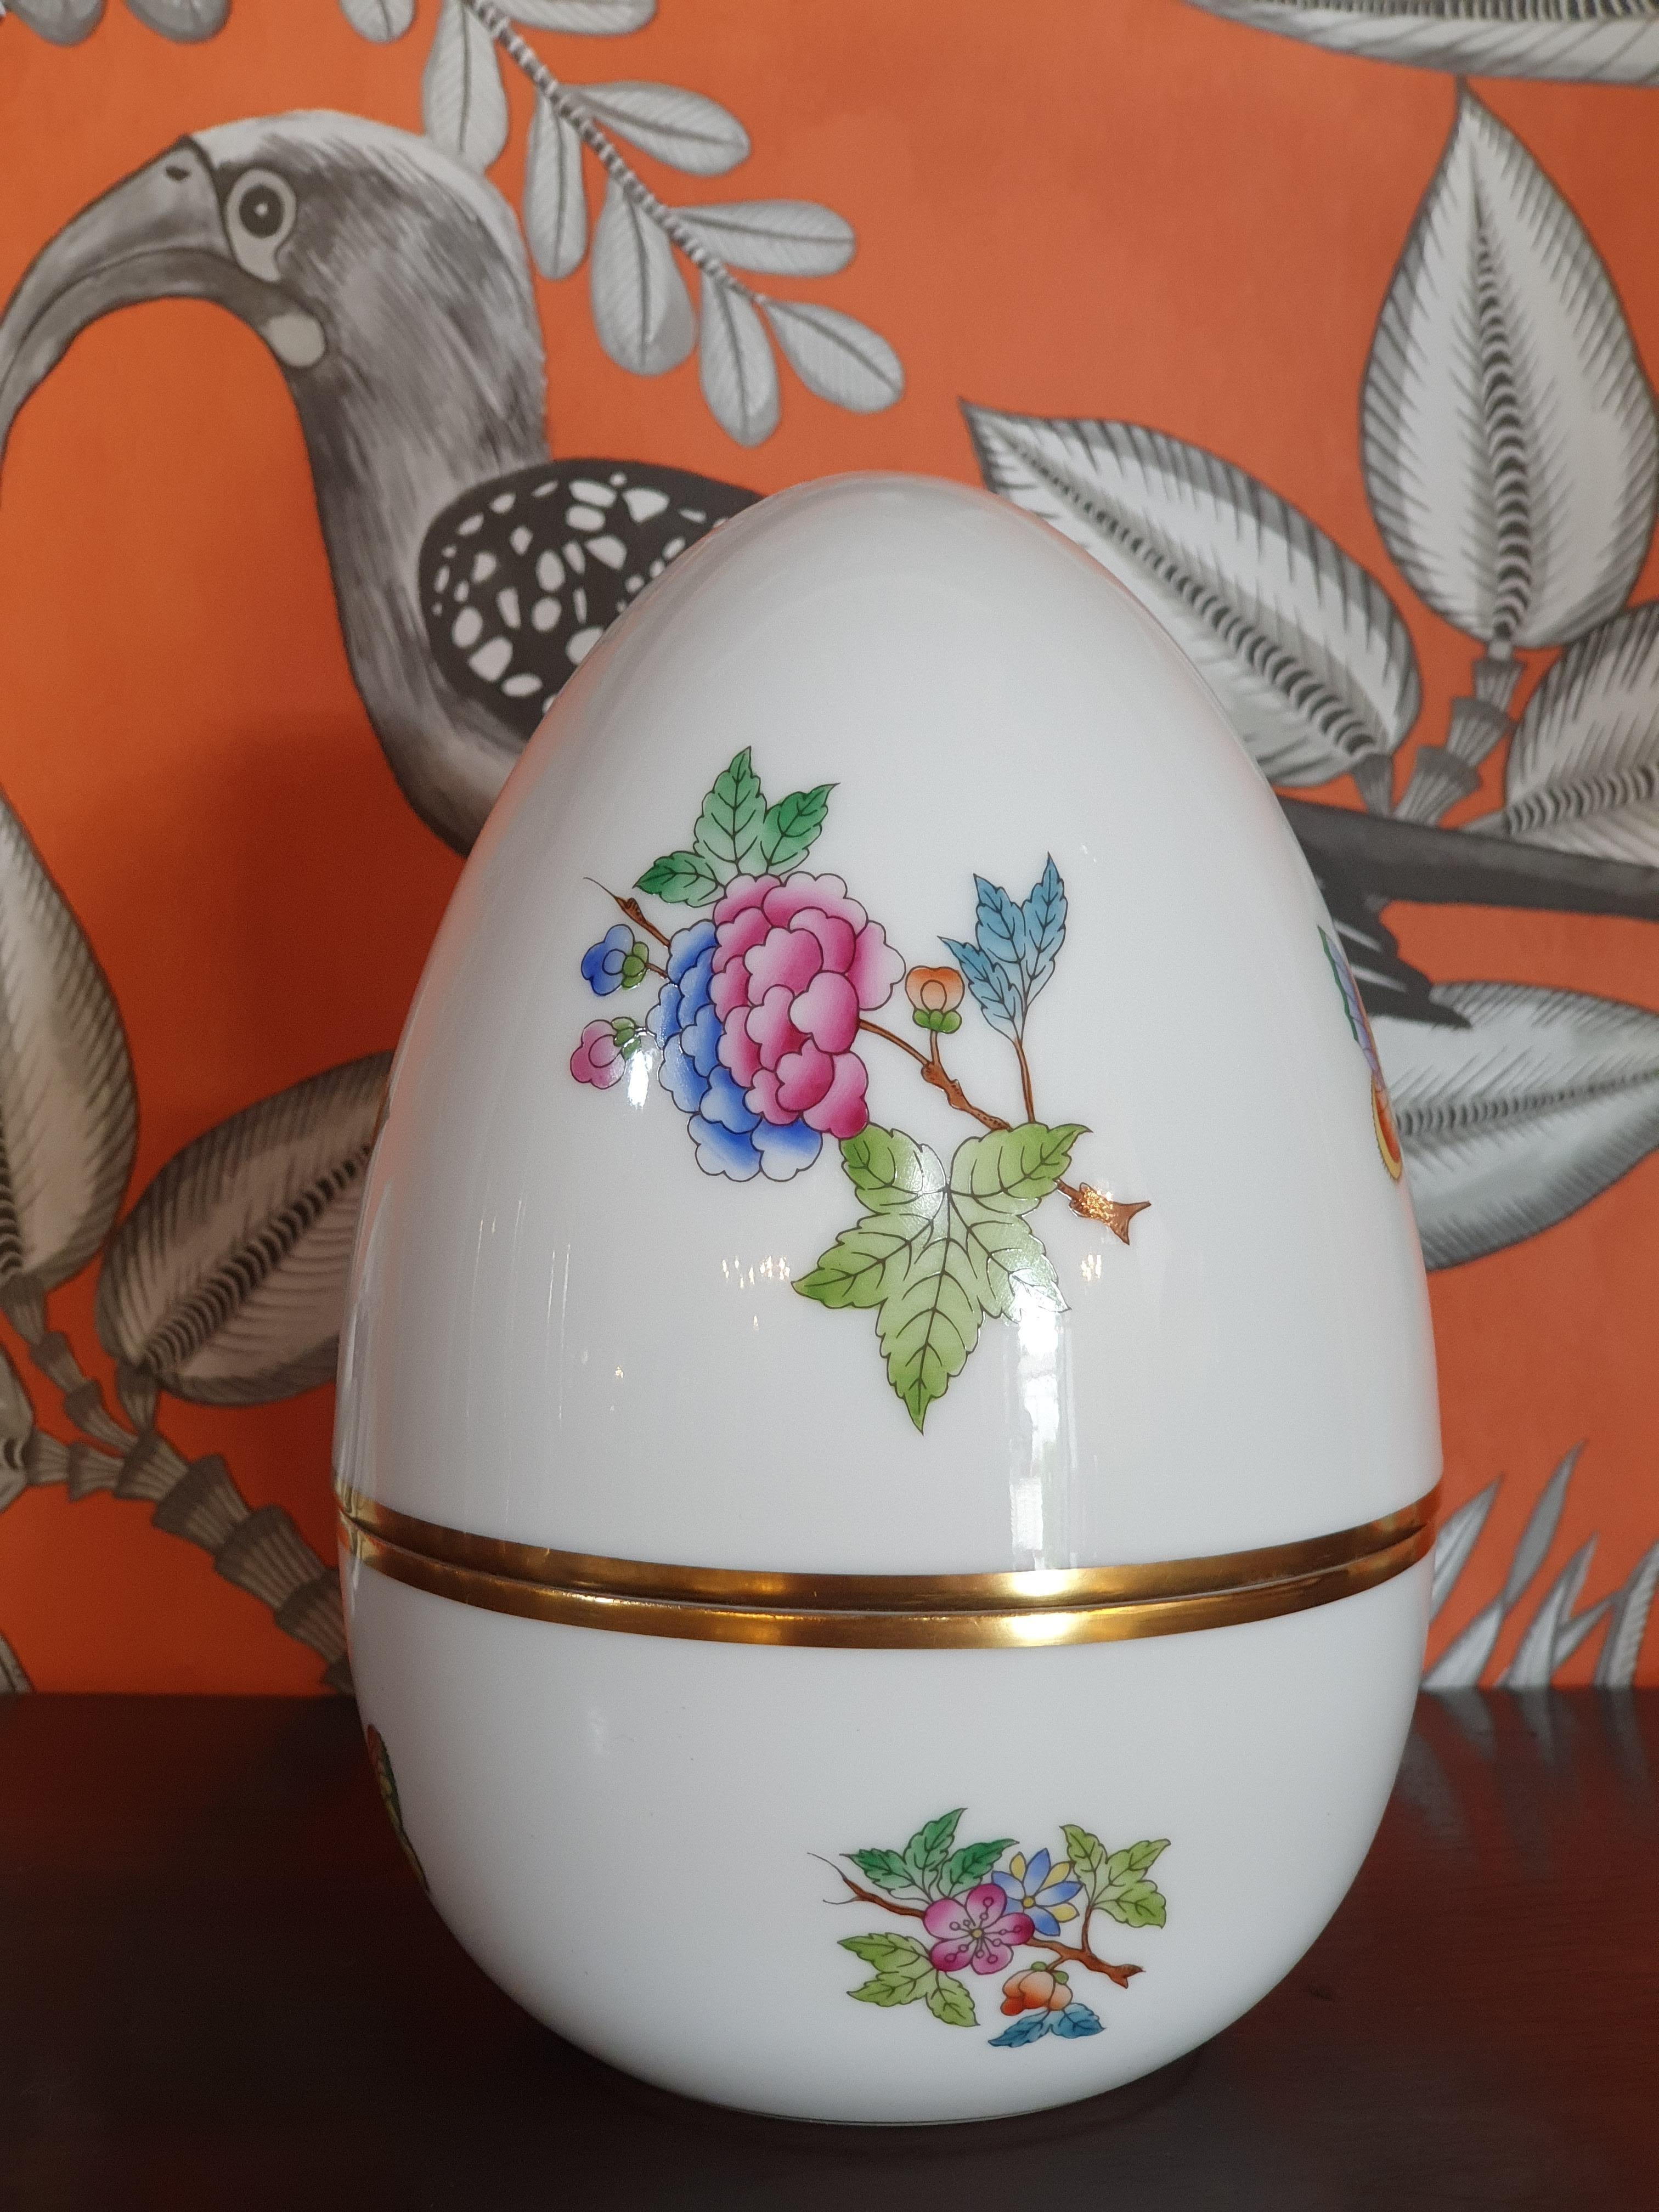 Contemporary Herend Hand Painted Porcelain Set of Two Egg Boxes, Hungary, 2021, New